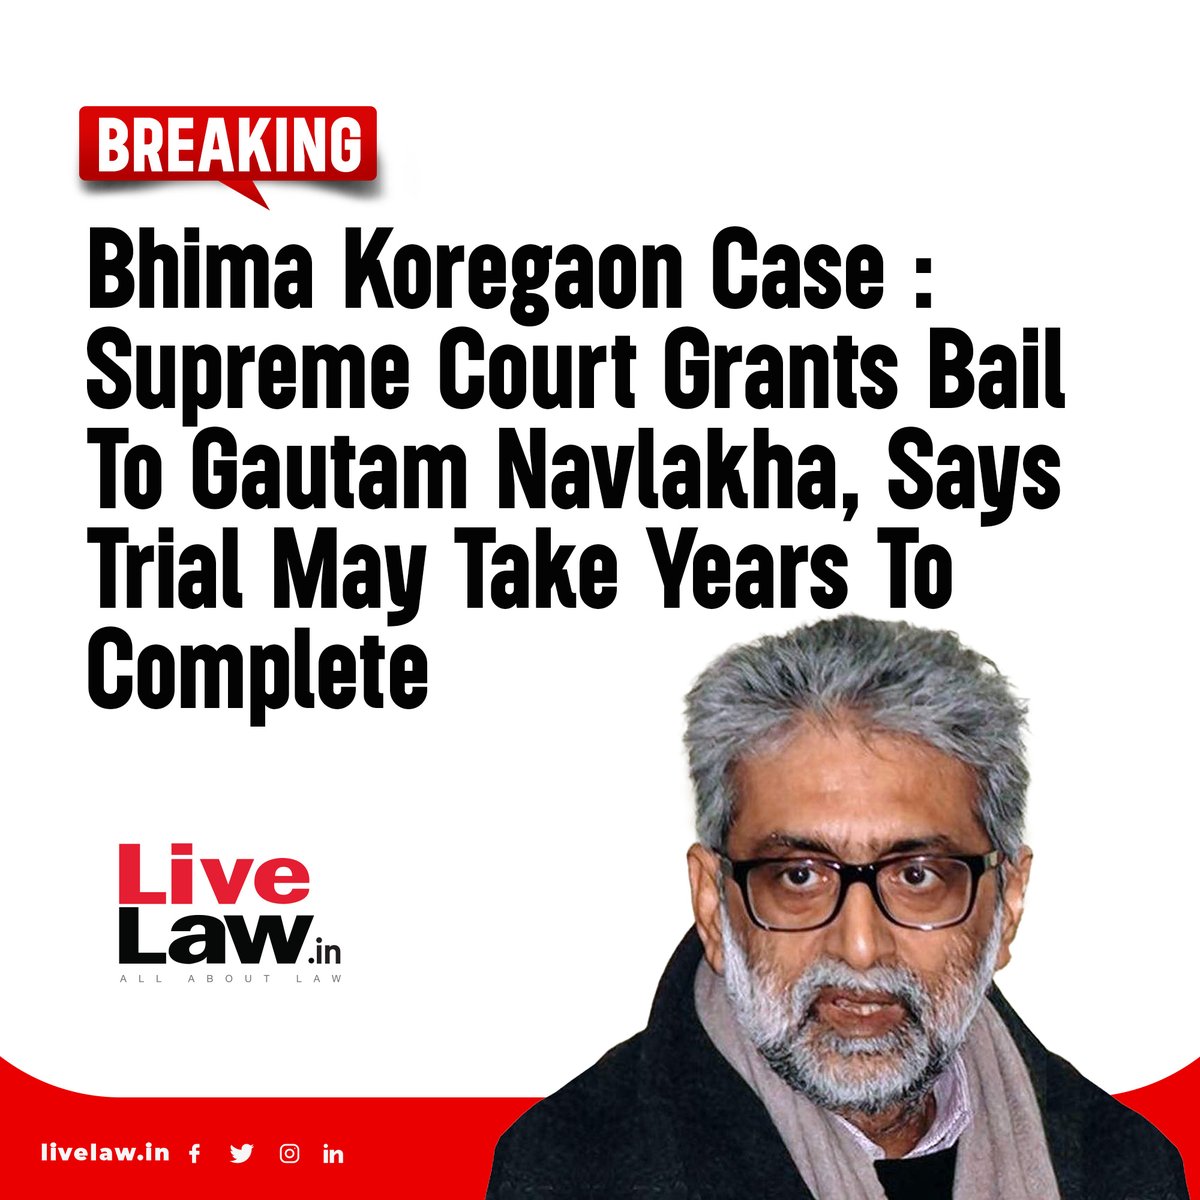 In a major development, the Supreme Court (today May 14) has granted bail to Bhima Koregaon-accused Gautam Navlakha. The same is subject to the payment of Rs 20 Lakhs for his house arrest.
Read more: t.ly/7Yez3
#SupremeCourtOfIndia #GautamNavlakha #BhimaKoregaon